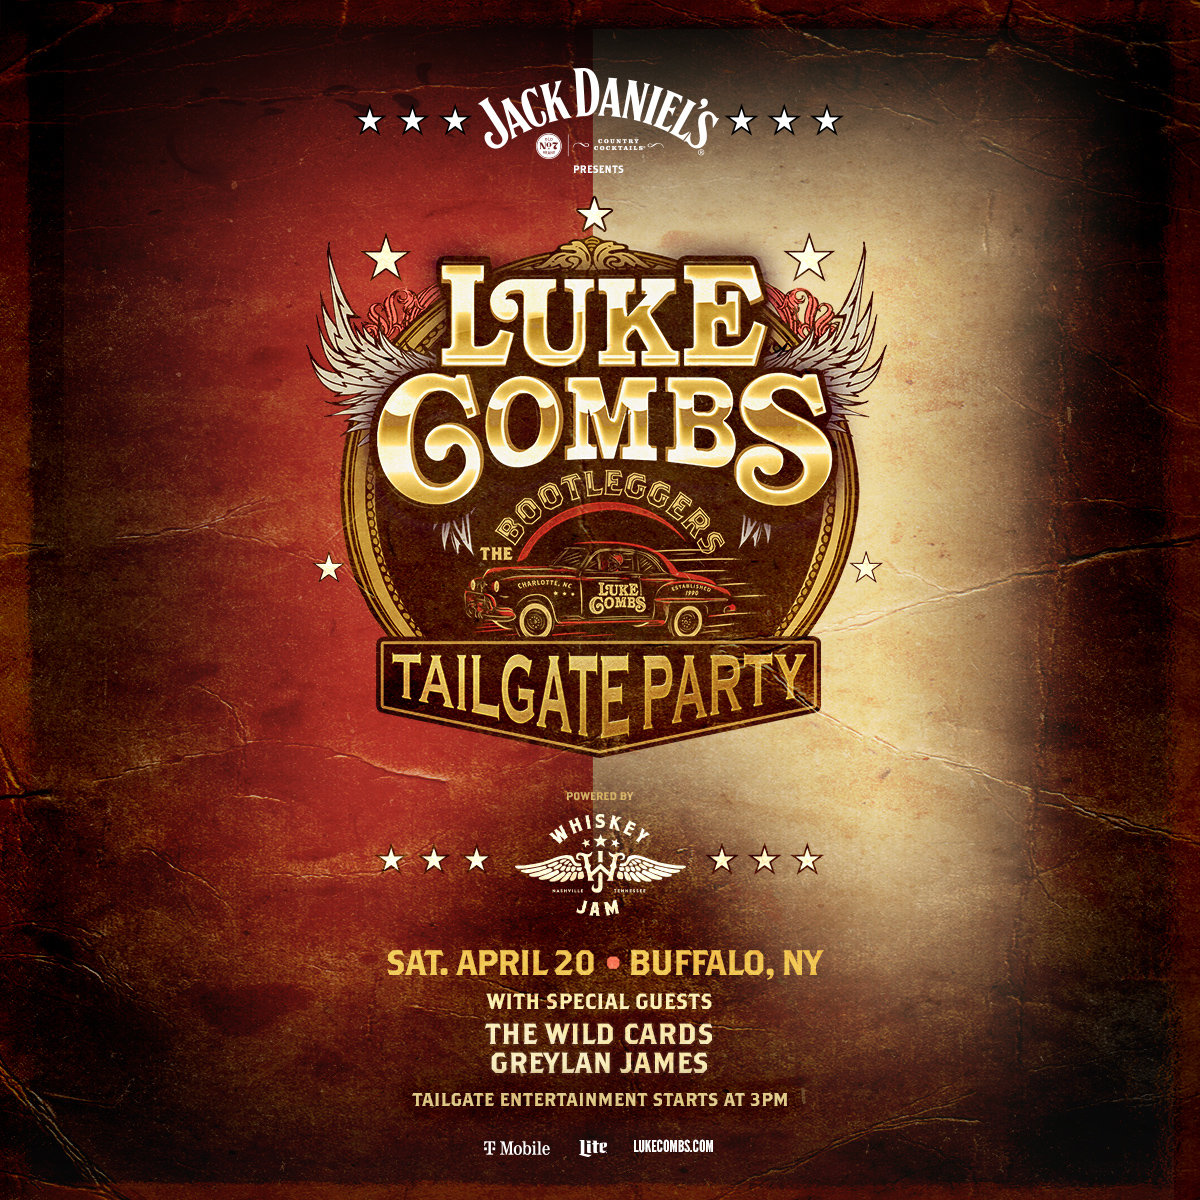 Join us at the Bootleggers Tailgate Party ahead of Luke Combs' show on April 20. The tailgate starts at 3 PM and features entertainment from The Wild Cards and Greylan James, early merchandise sales and all the fun you need before the show!